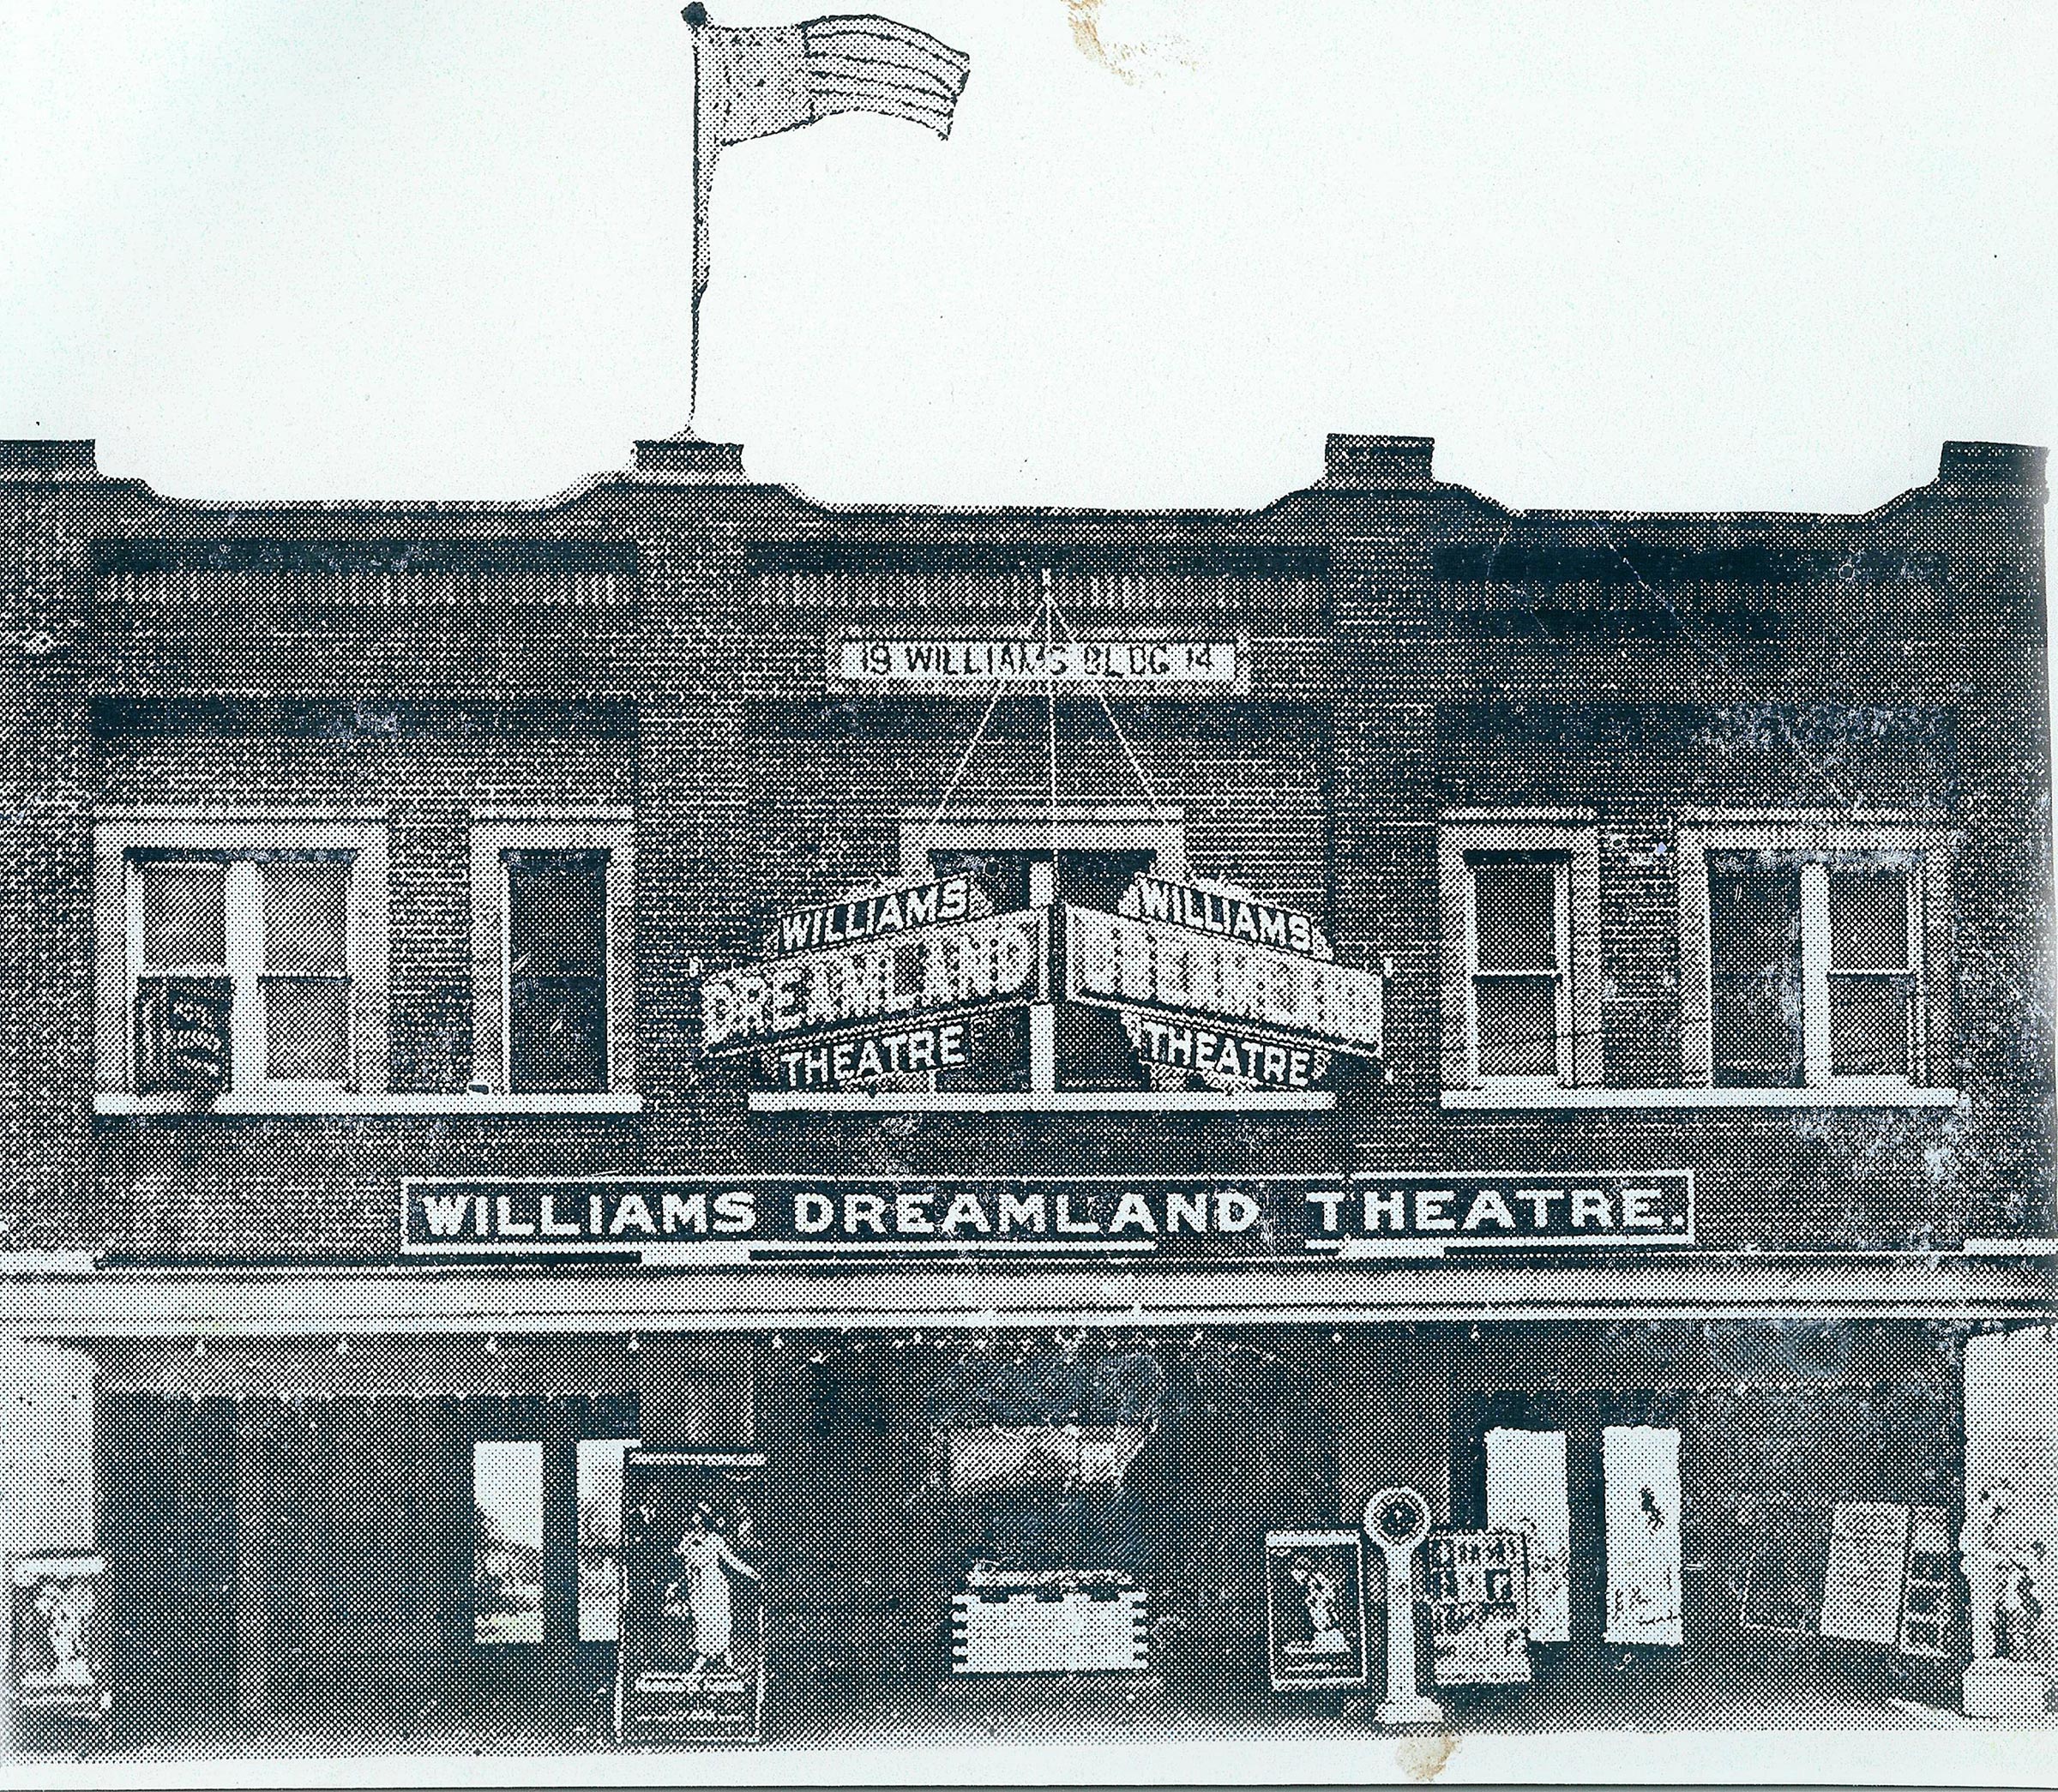 The Williams Dreamland Theatre in Tulsa, Okla., before it was destroyed during the Tulsa Race Massacre, in 1921.